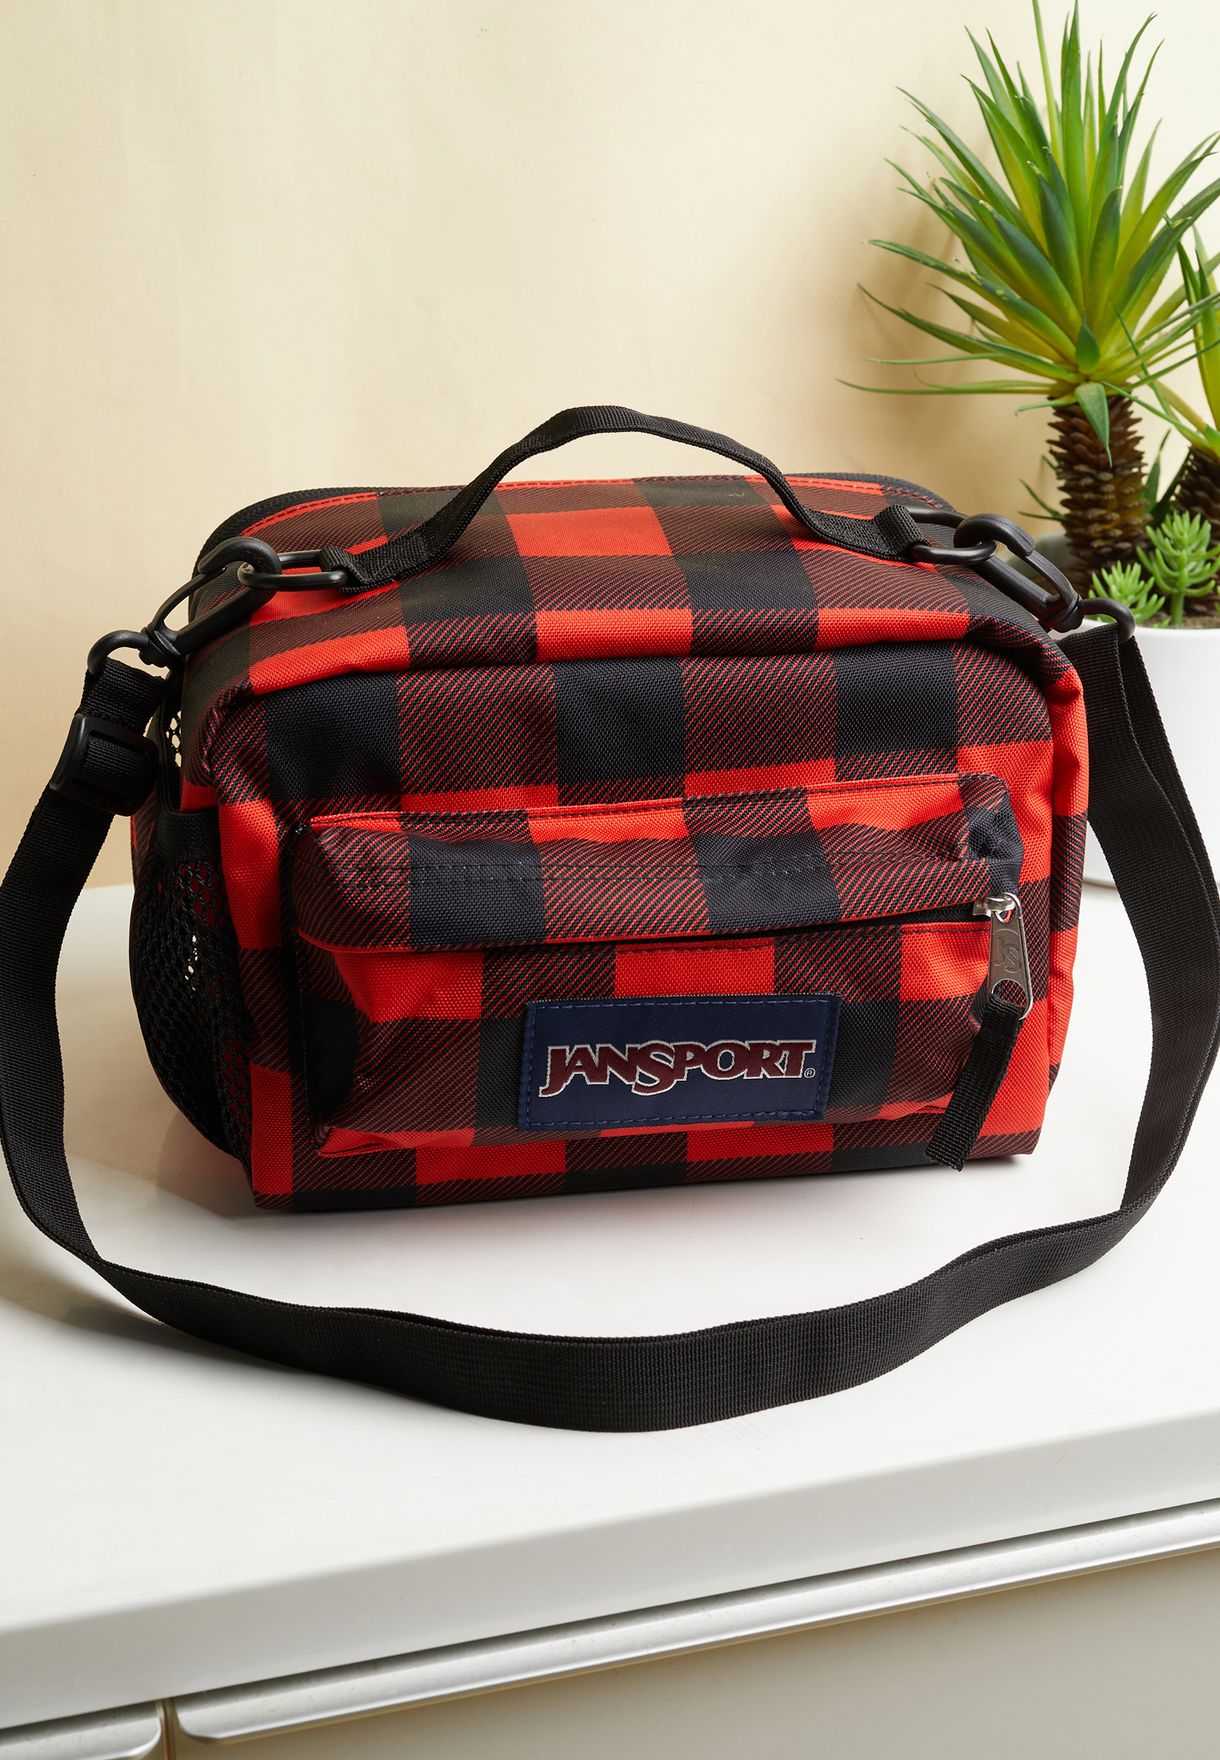 The Carryout Duffel Bag